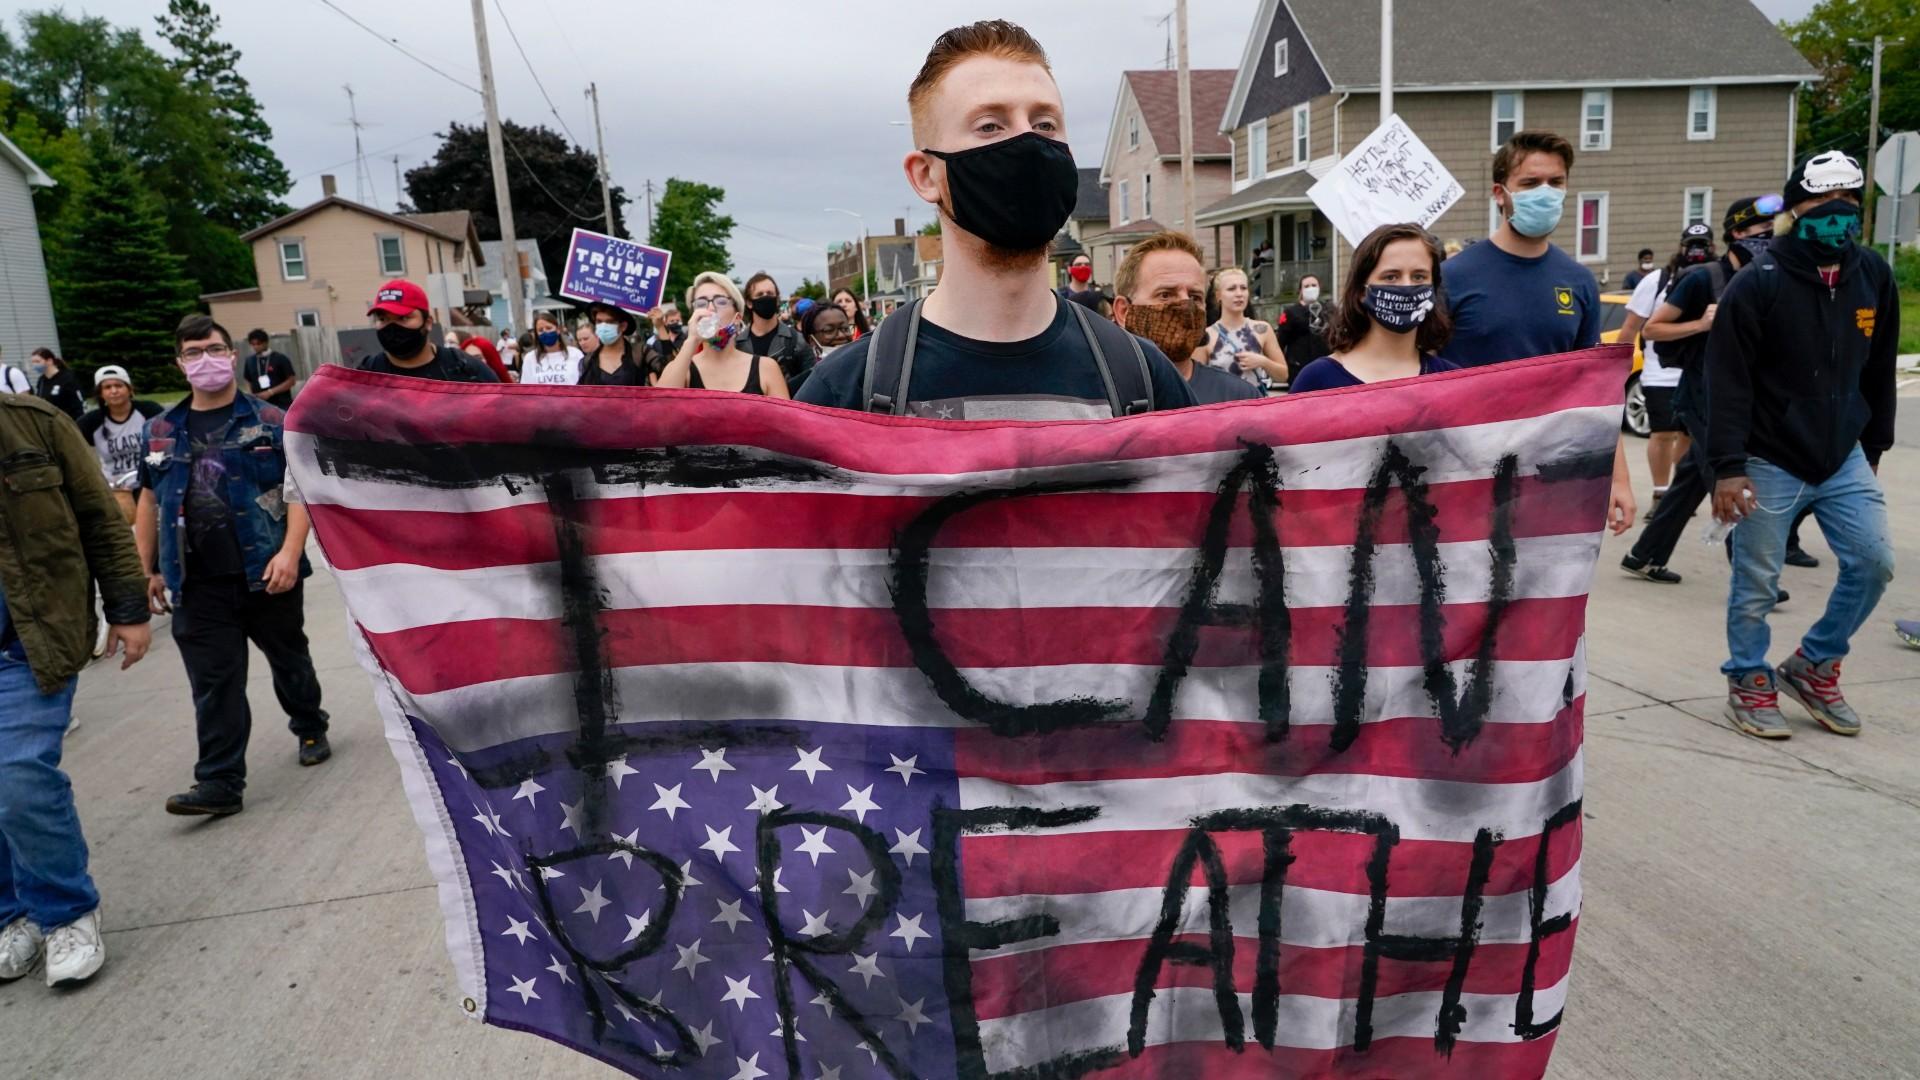 A protester holds a flag during a Black Lives Matter protest Tuesday, Sept. 1, 2020, in Kenosha, Wis. (AP Photo / Morry Gash)